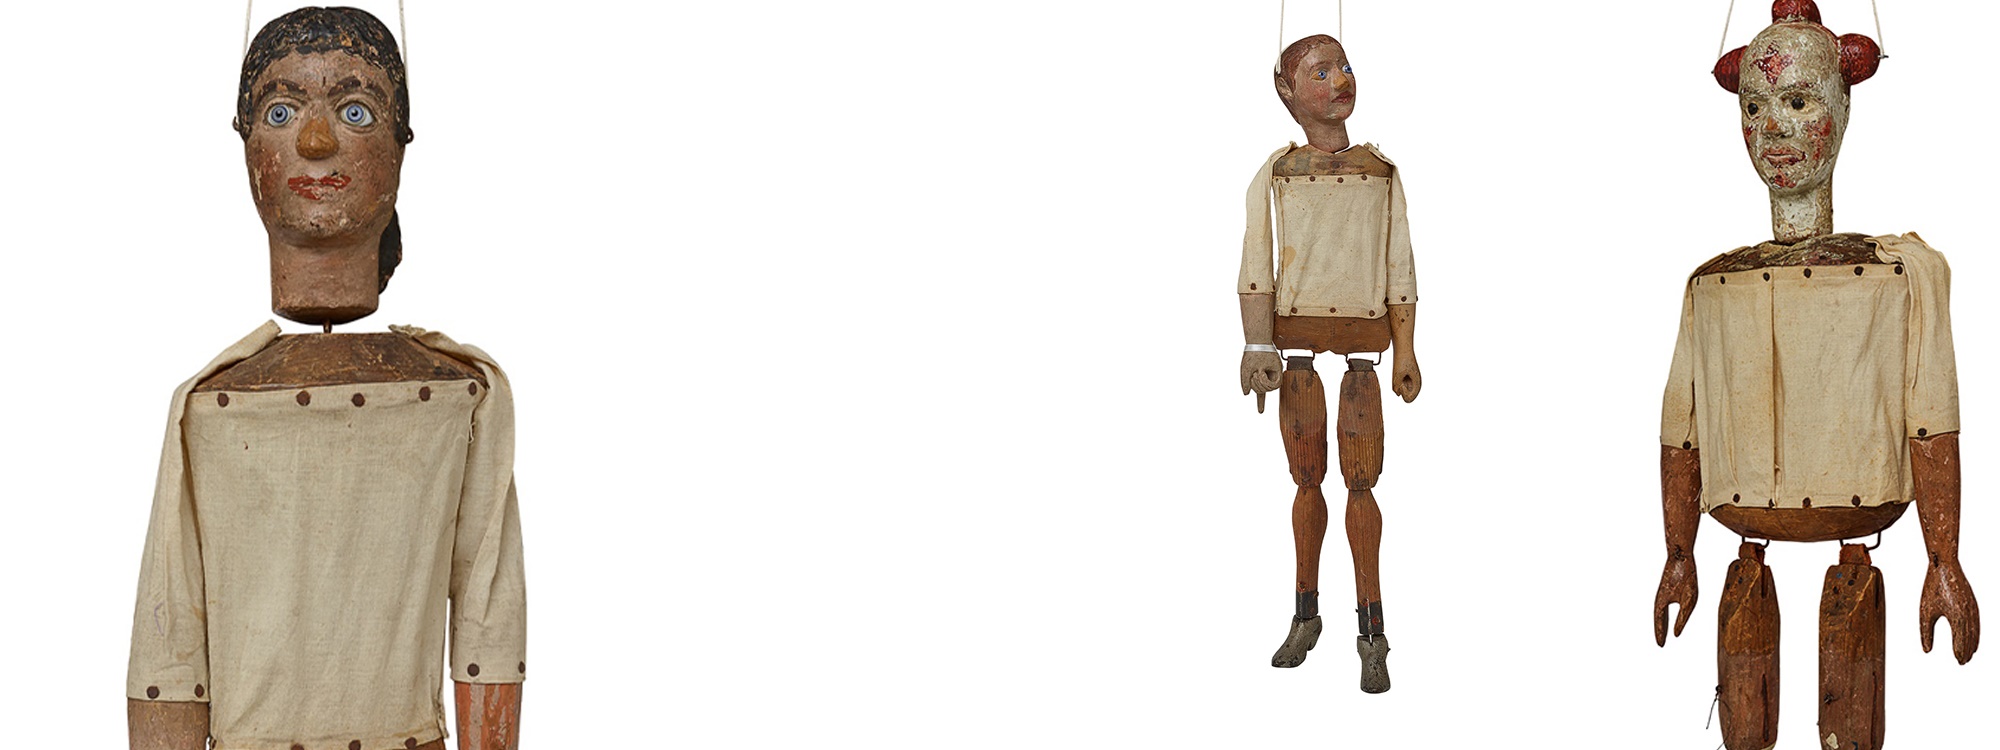 The Clowes & Sons' Excelsior Marionettes